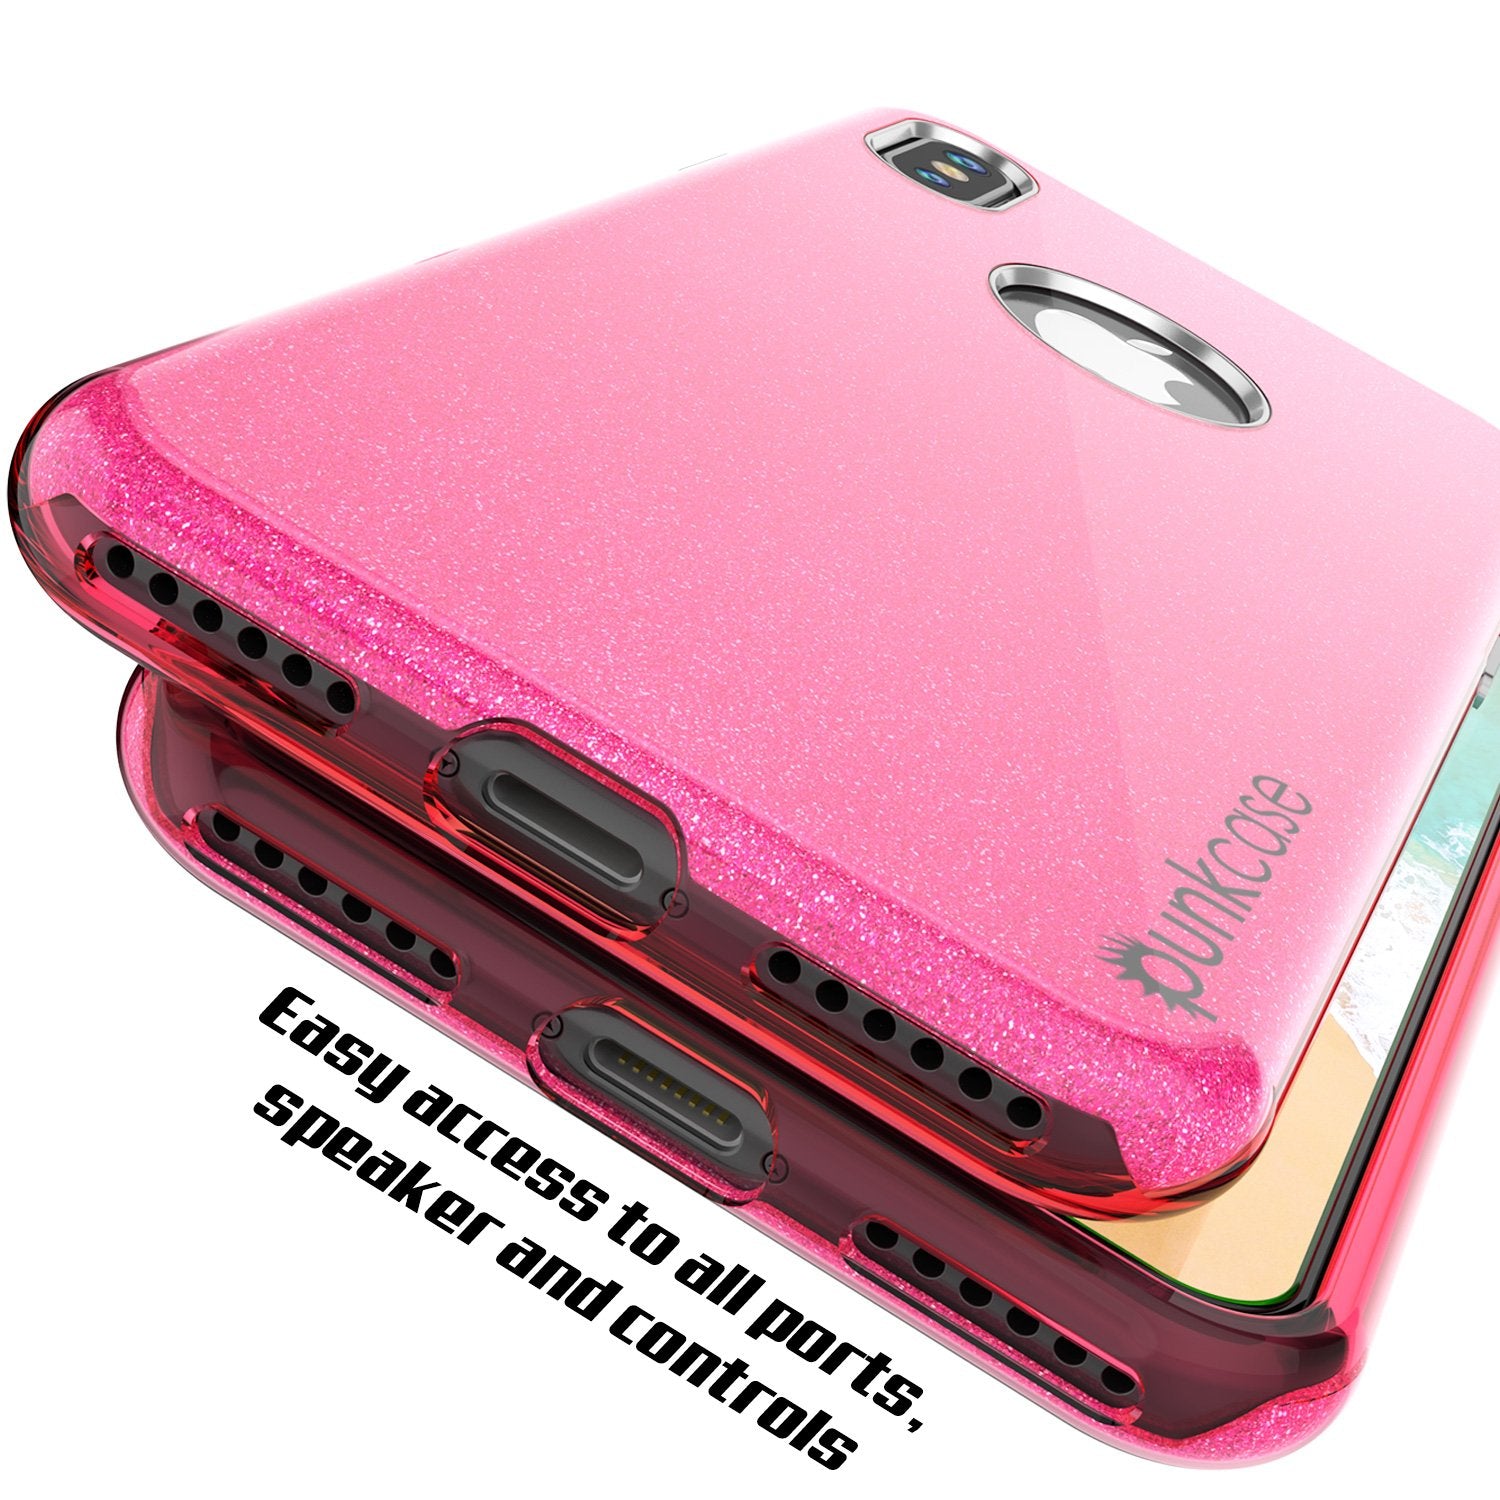 iPhone X Case, Punkcase Galactic 2.0 Series Ultra Slim w/ Tempered Glass Screen Protector | [Pink] - PunkCase NZ